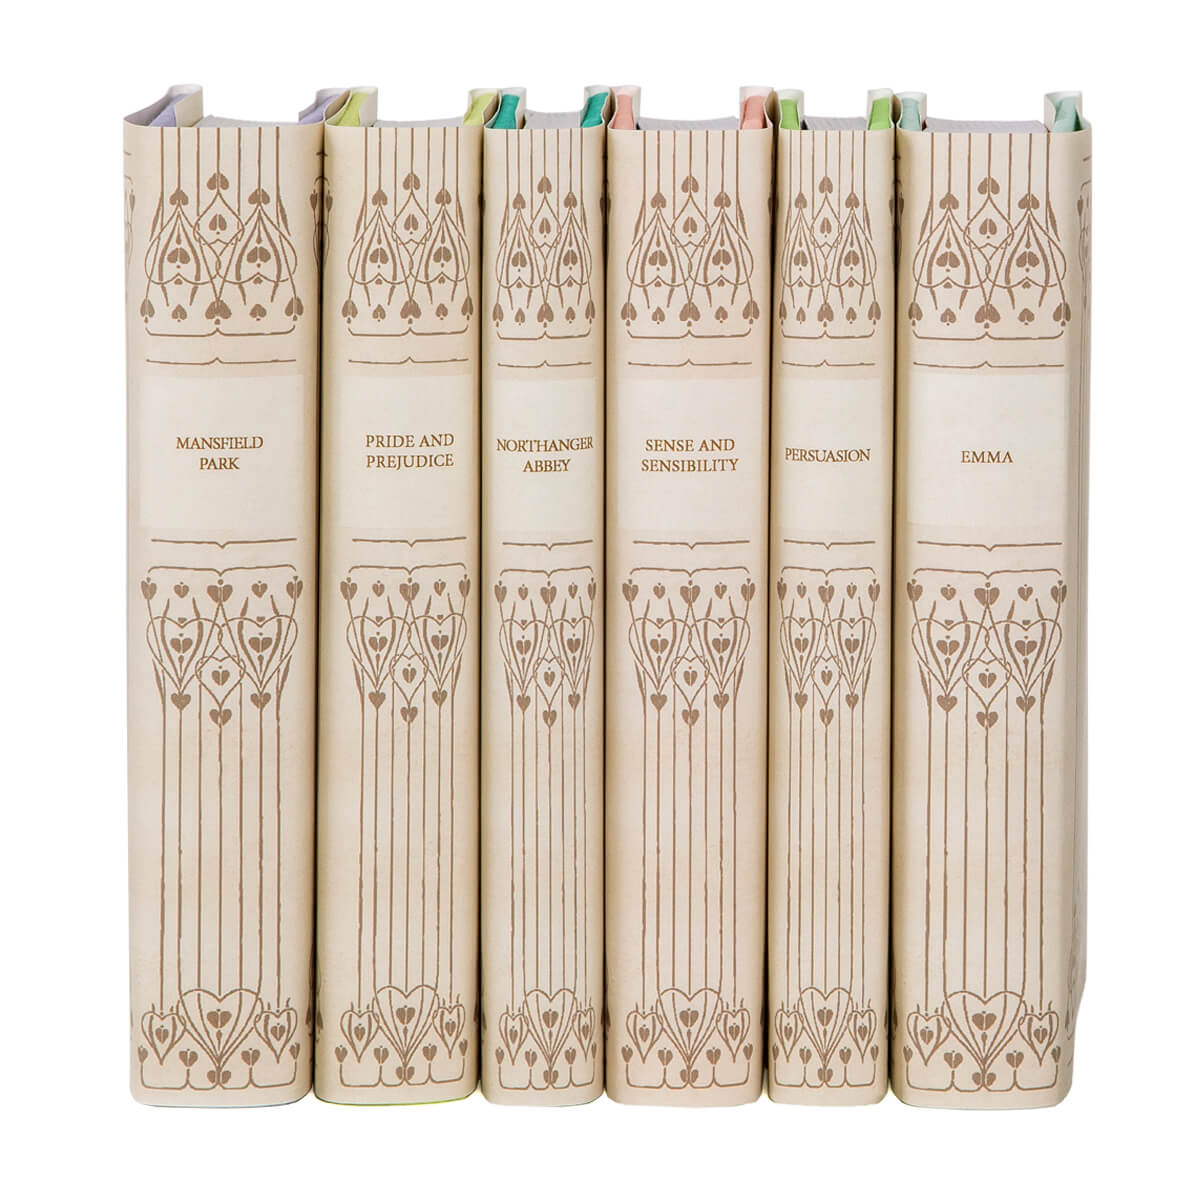 Faux Vellum jackets with ornamental design and book title on spine. Jane Austen Vellum Book Set from Juniper Custom